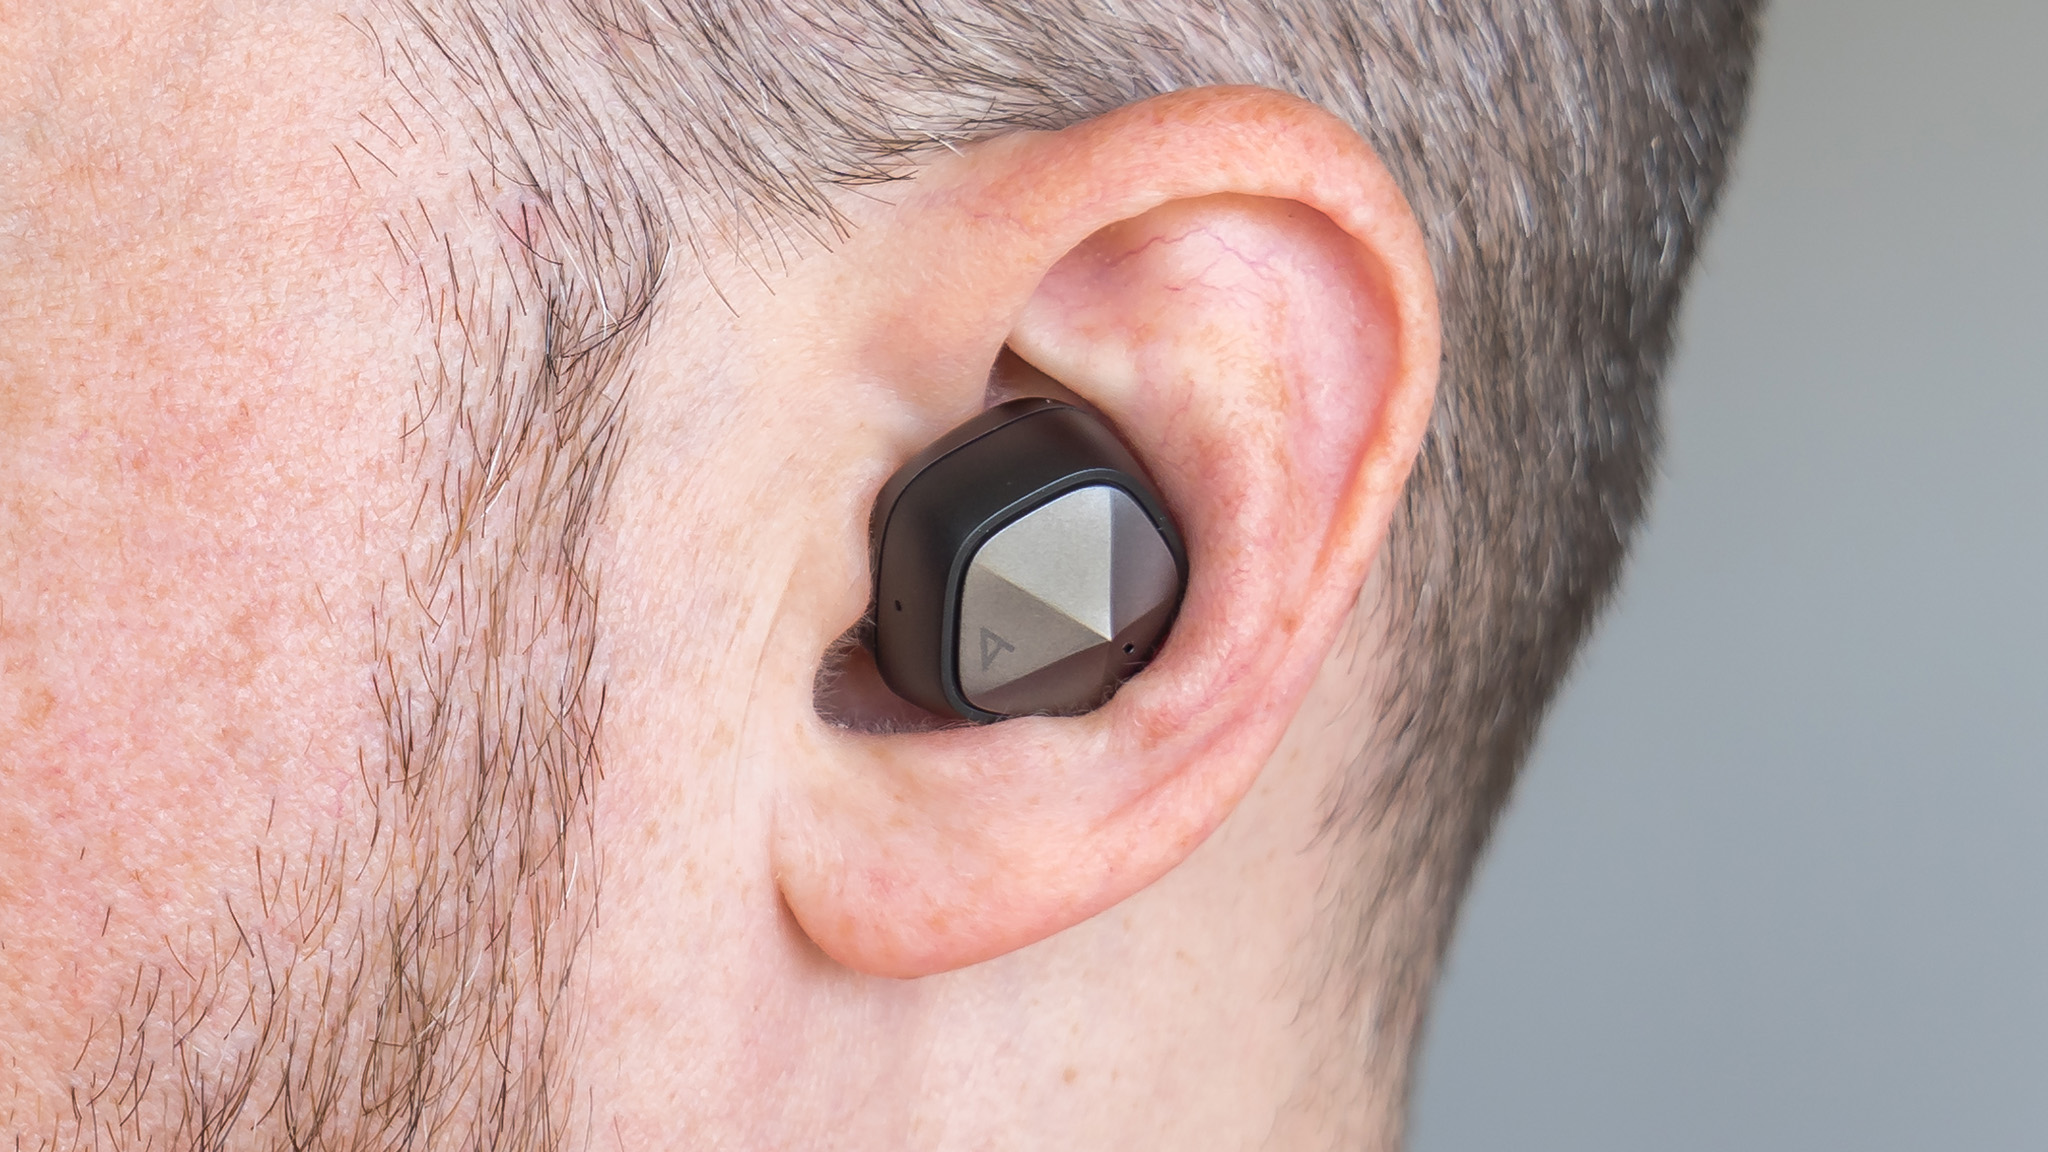 Close-up view of the Astell & Kern UW100 in the ear.